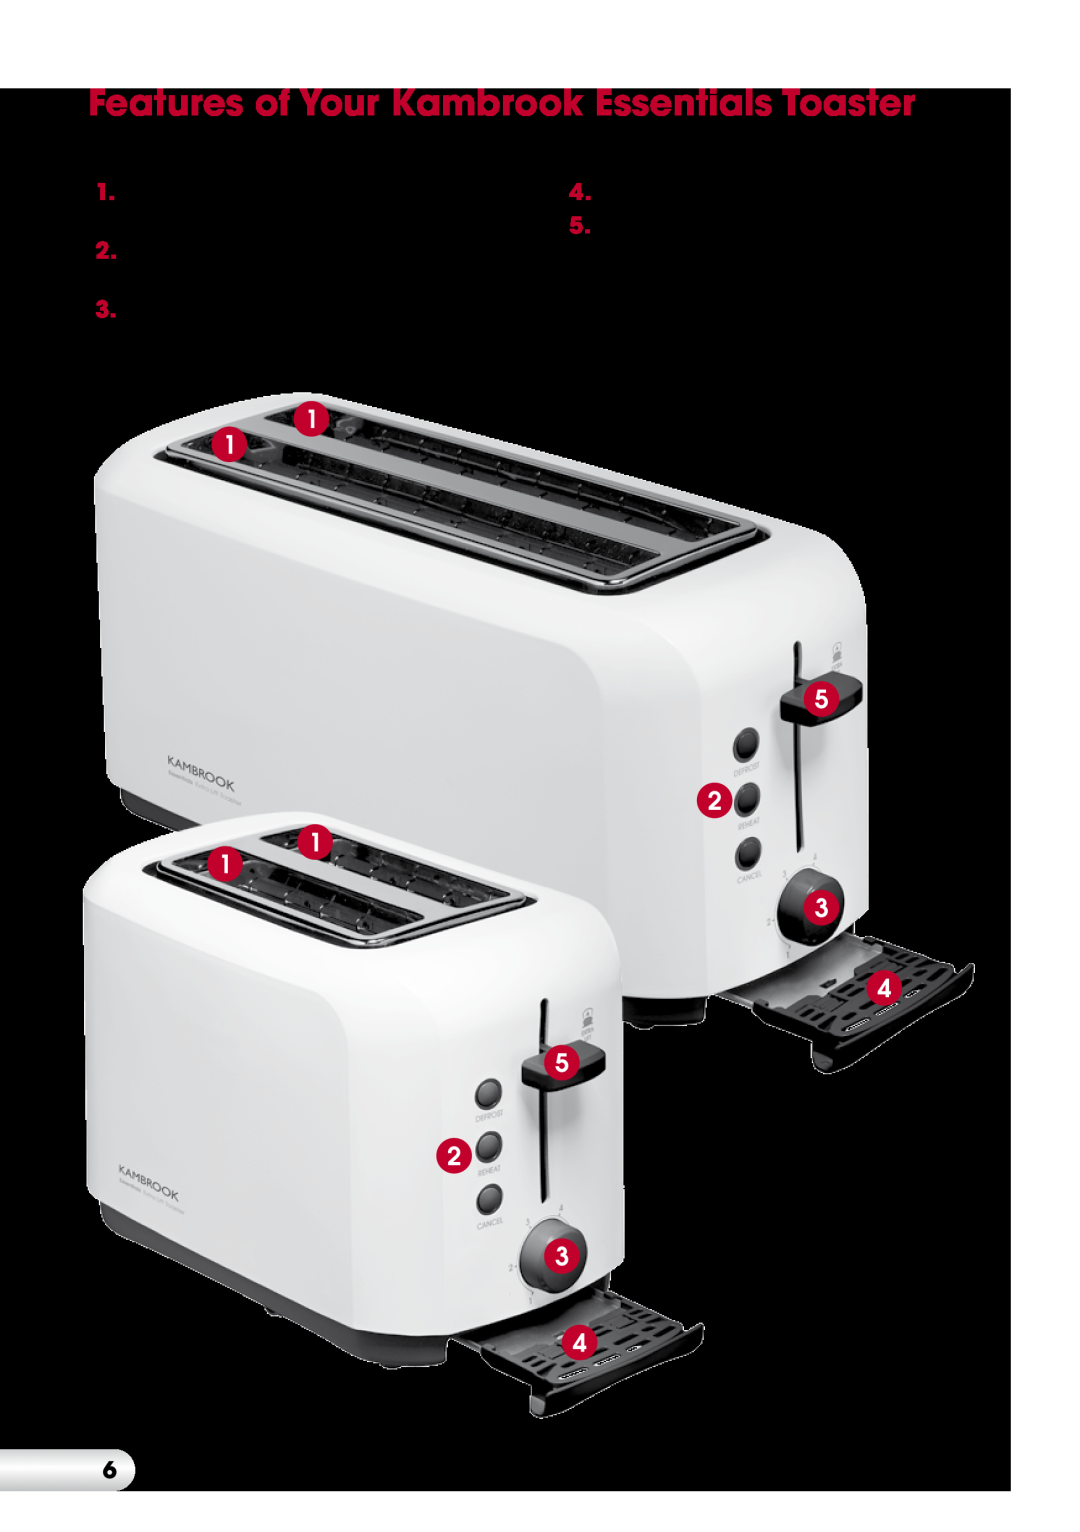 Kambrook KT60 Features of Your Kambrook Essentials Toaster, Self centring,extra wide and, Removable crumb tray, buttons 